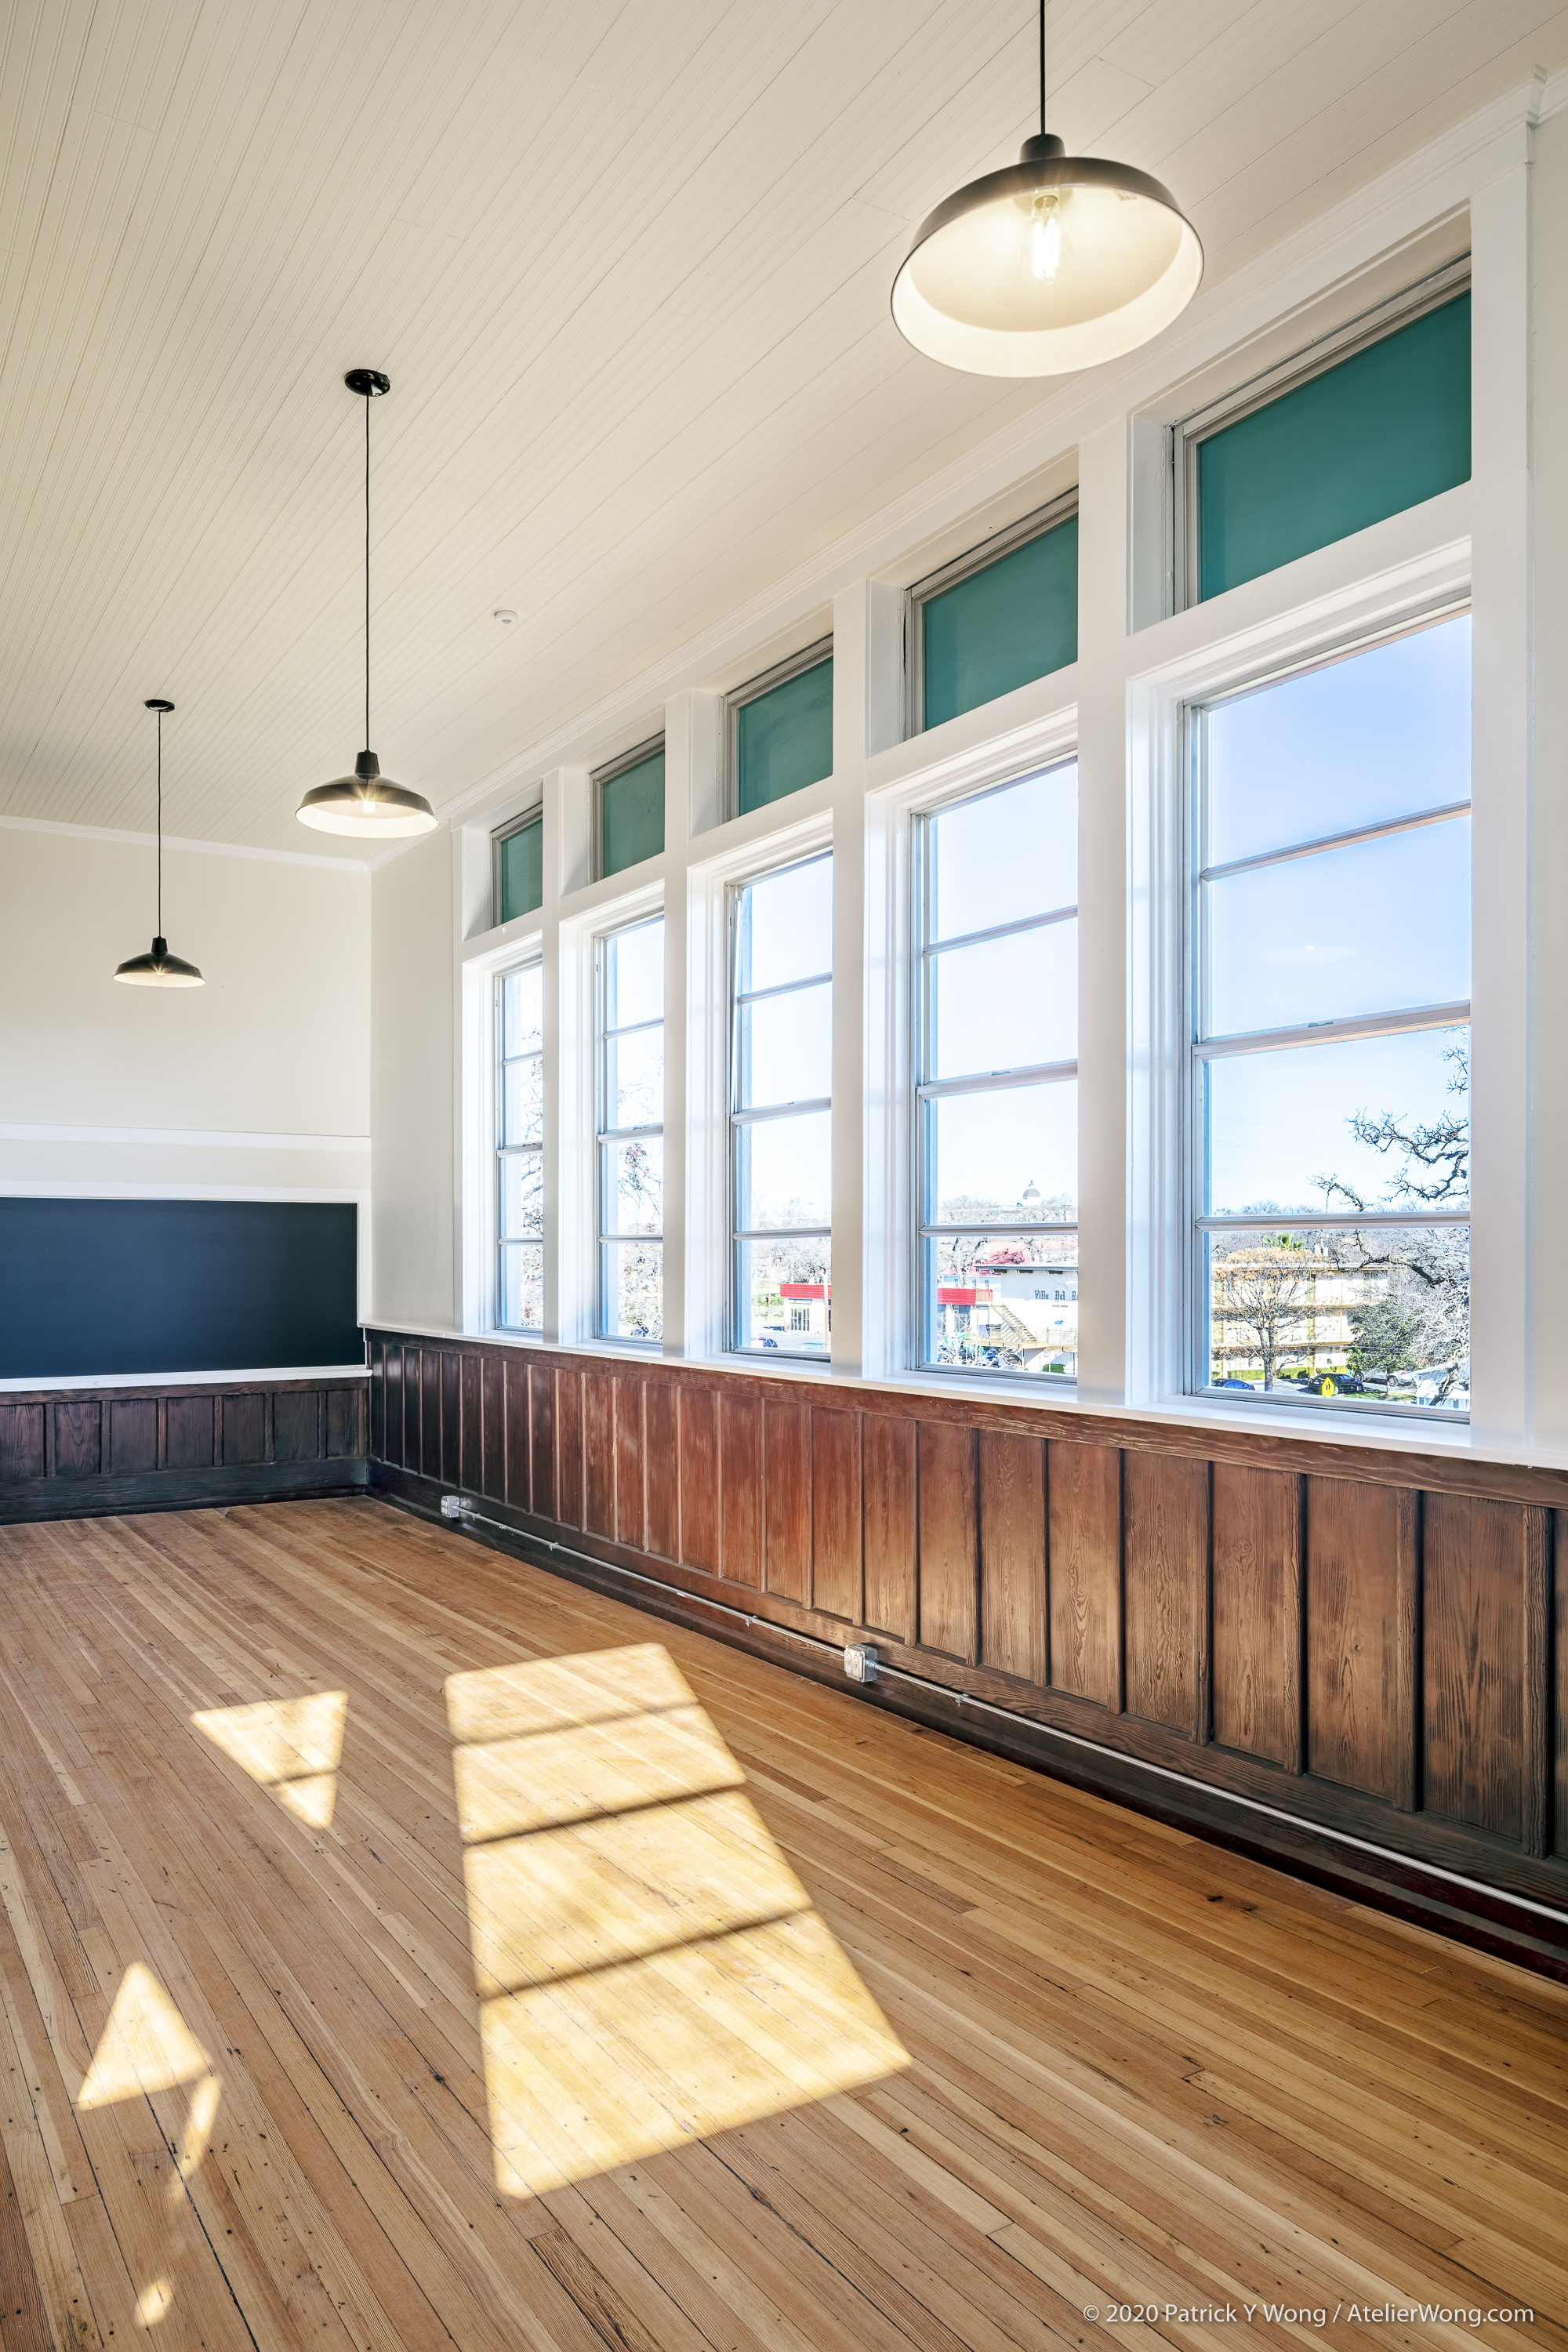 Restored, Historic Wainscot and Chalkboard in the Baker School in Austin, Texas